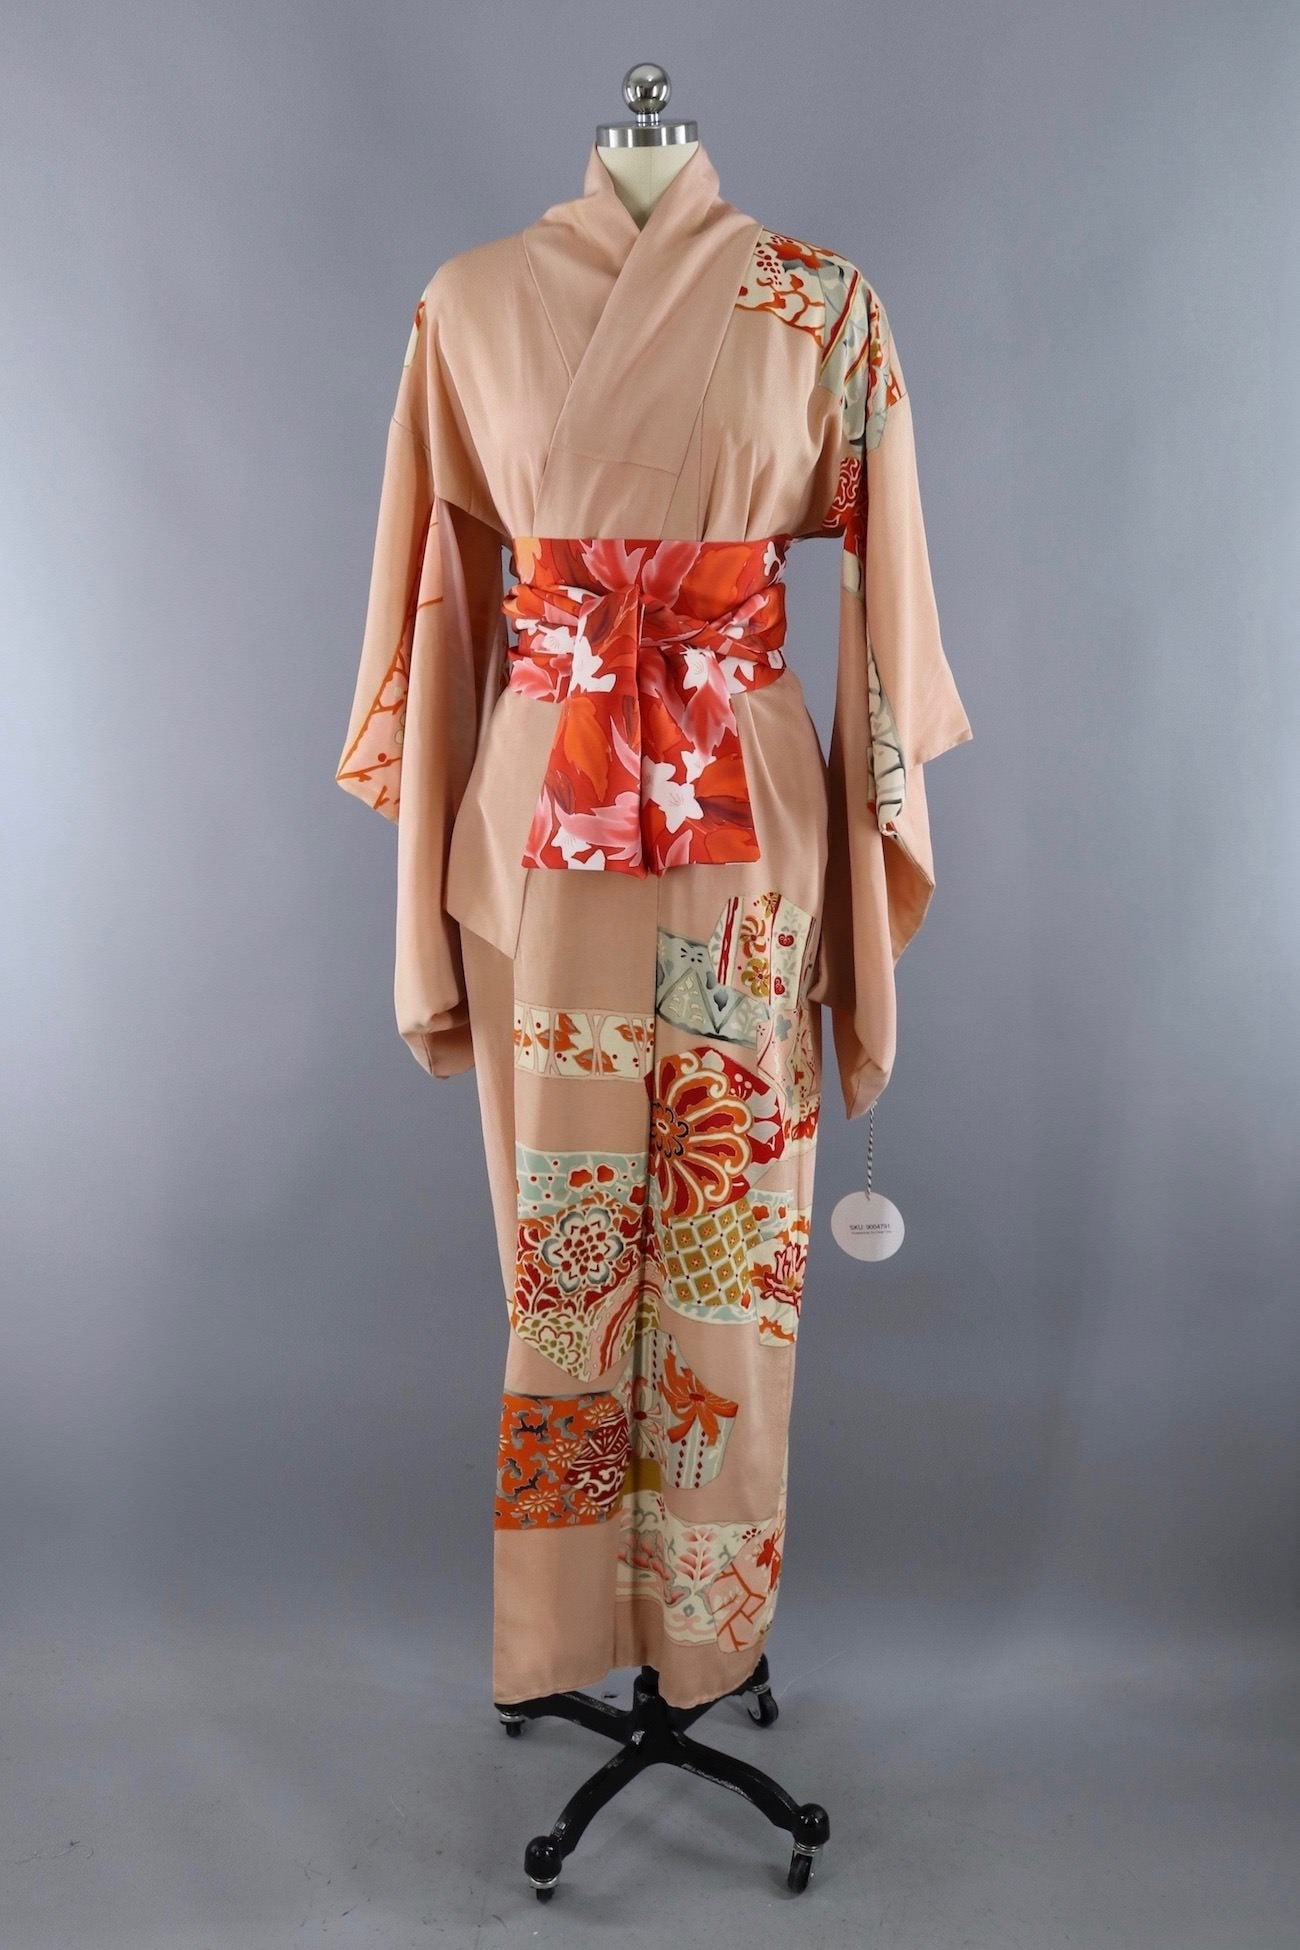 Vintage Silk Kimono Robe / 1940s Pink and Red Floral - ThisBlueBird